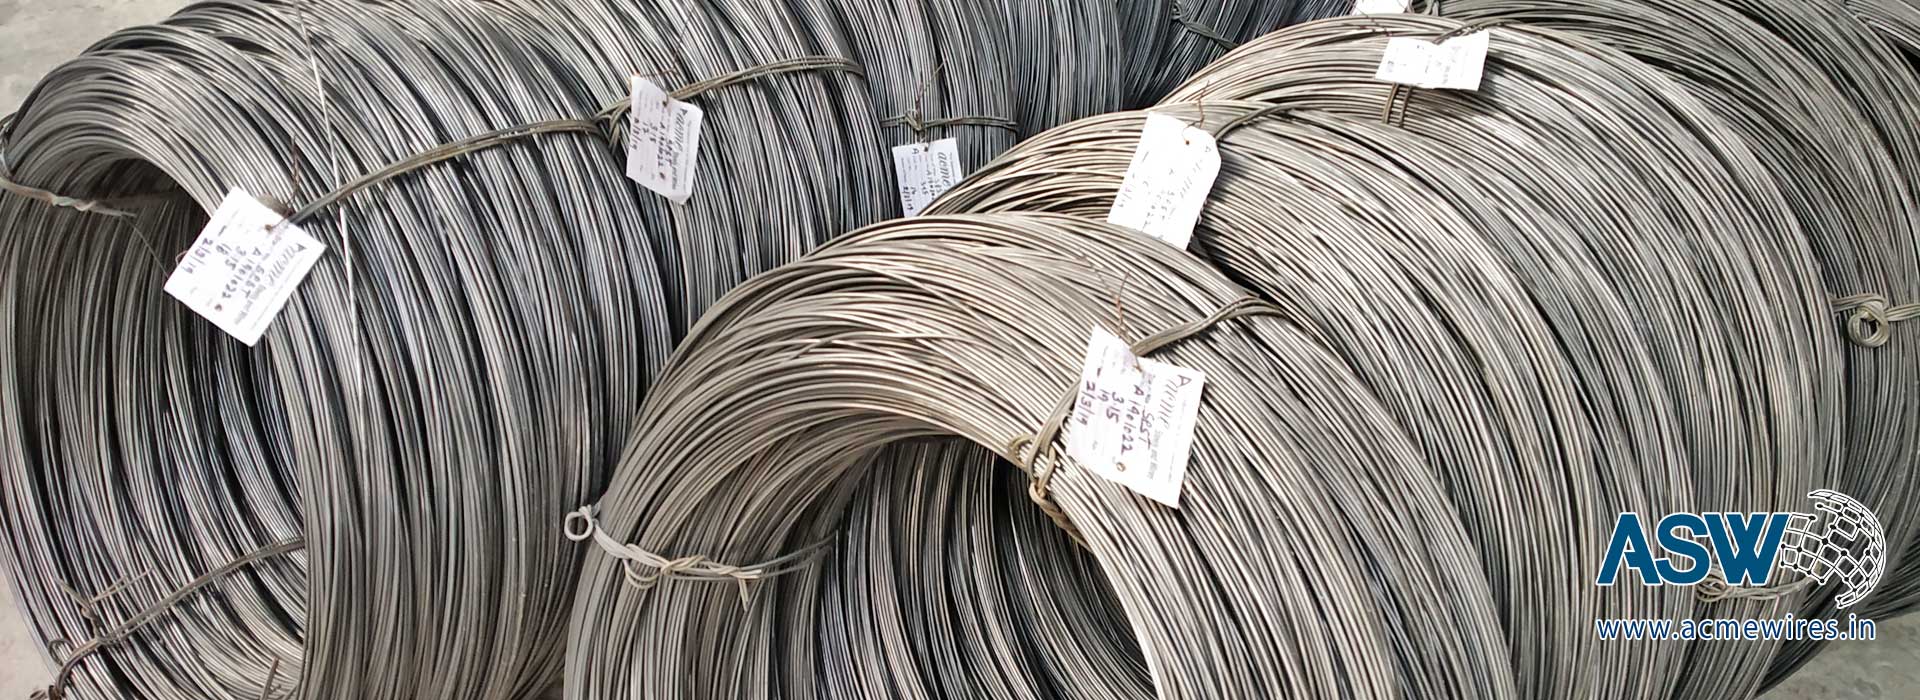 Spring Steel Wires Annealed Steel Wires manufacturers exporters India Punjab Ludhiana